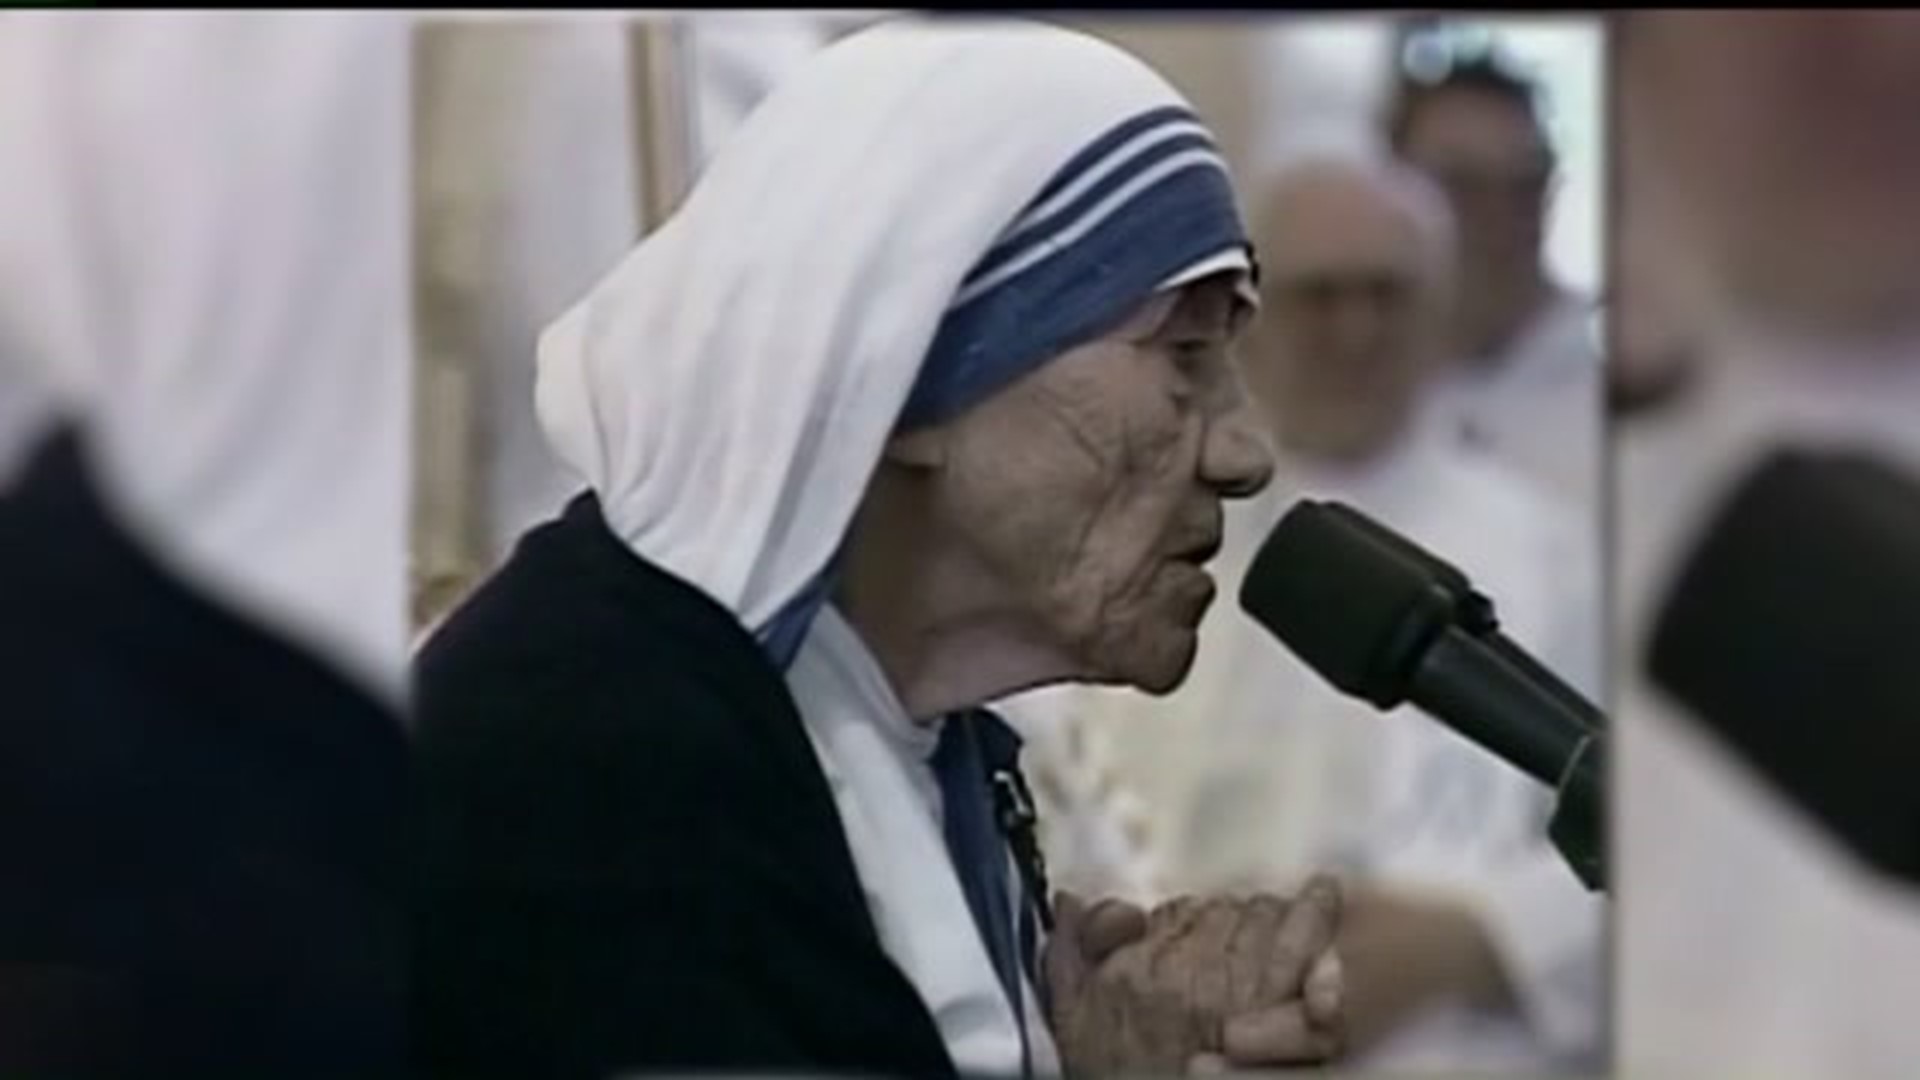 Volunteer Tourism Expected to Surge Where Mother Teresa Visited